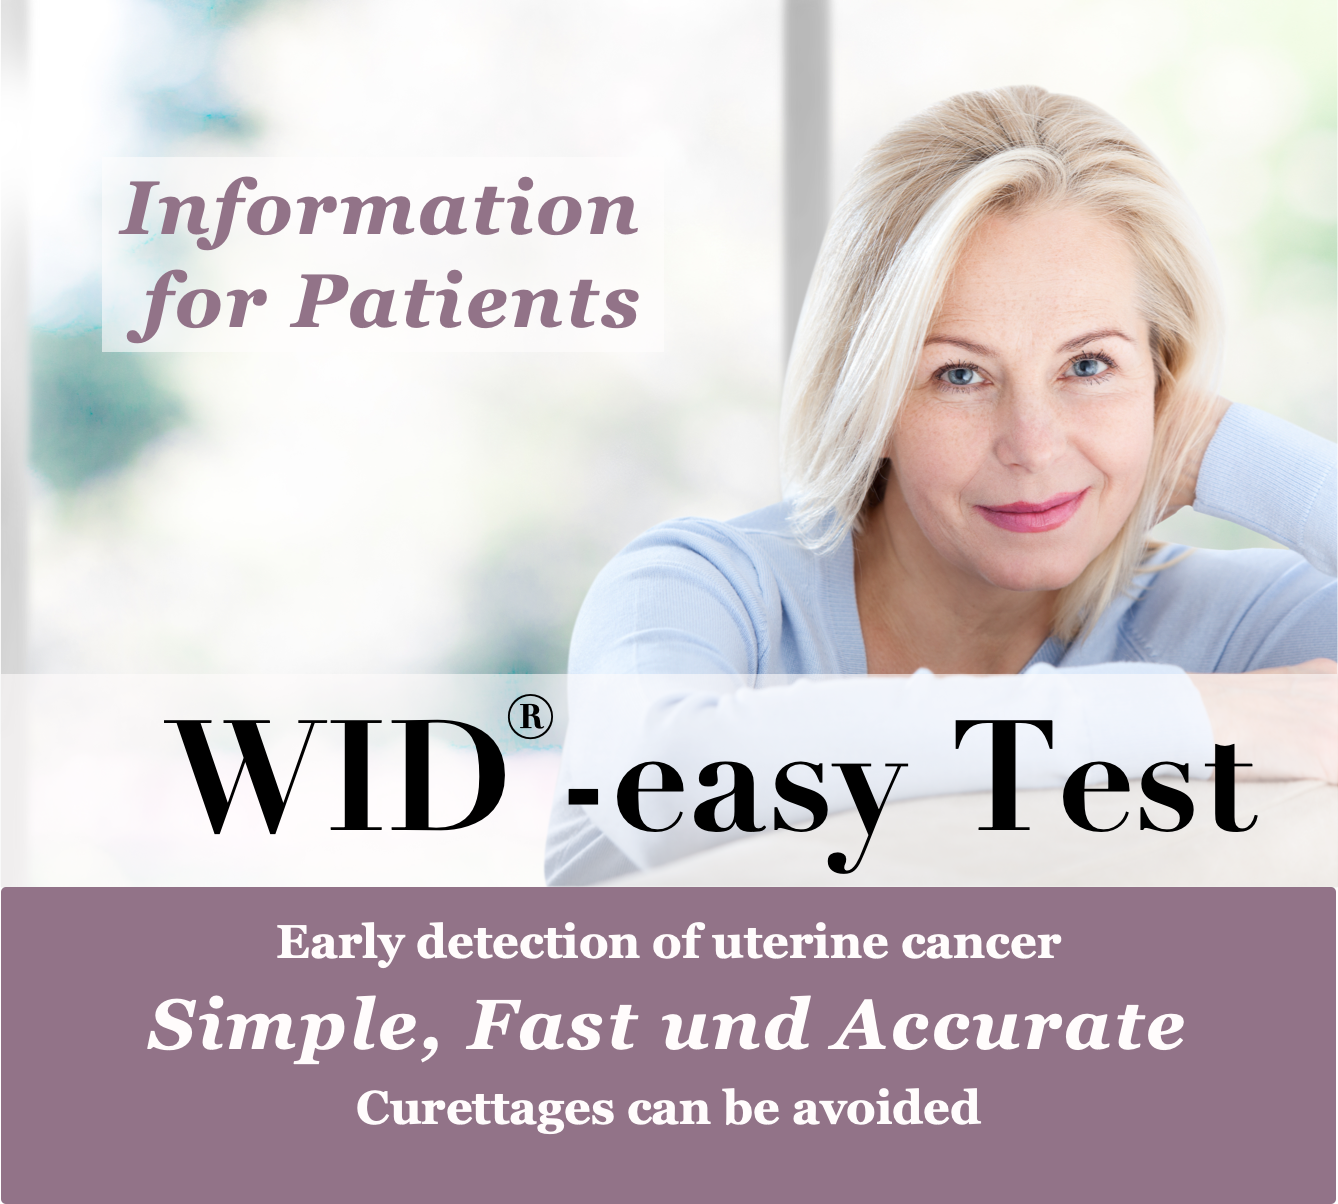 Information on the WID® easy Test